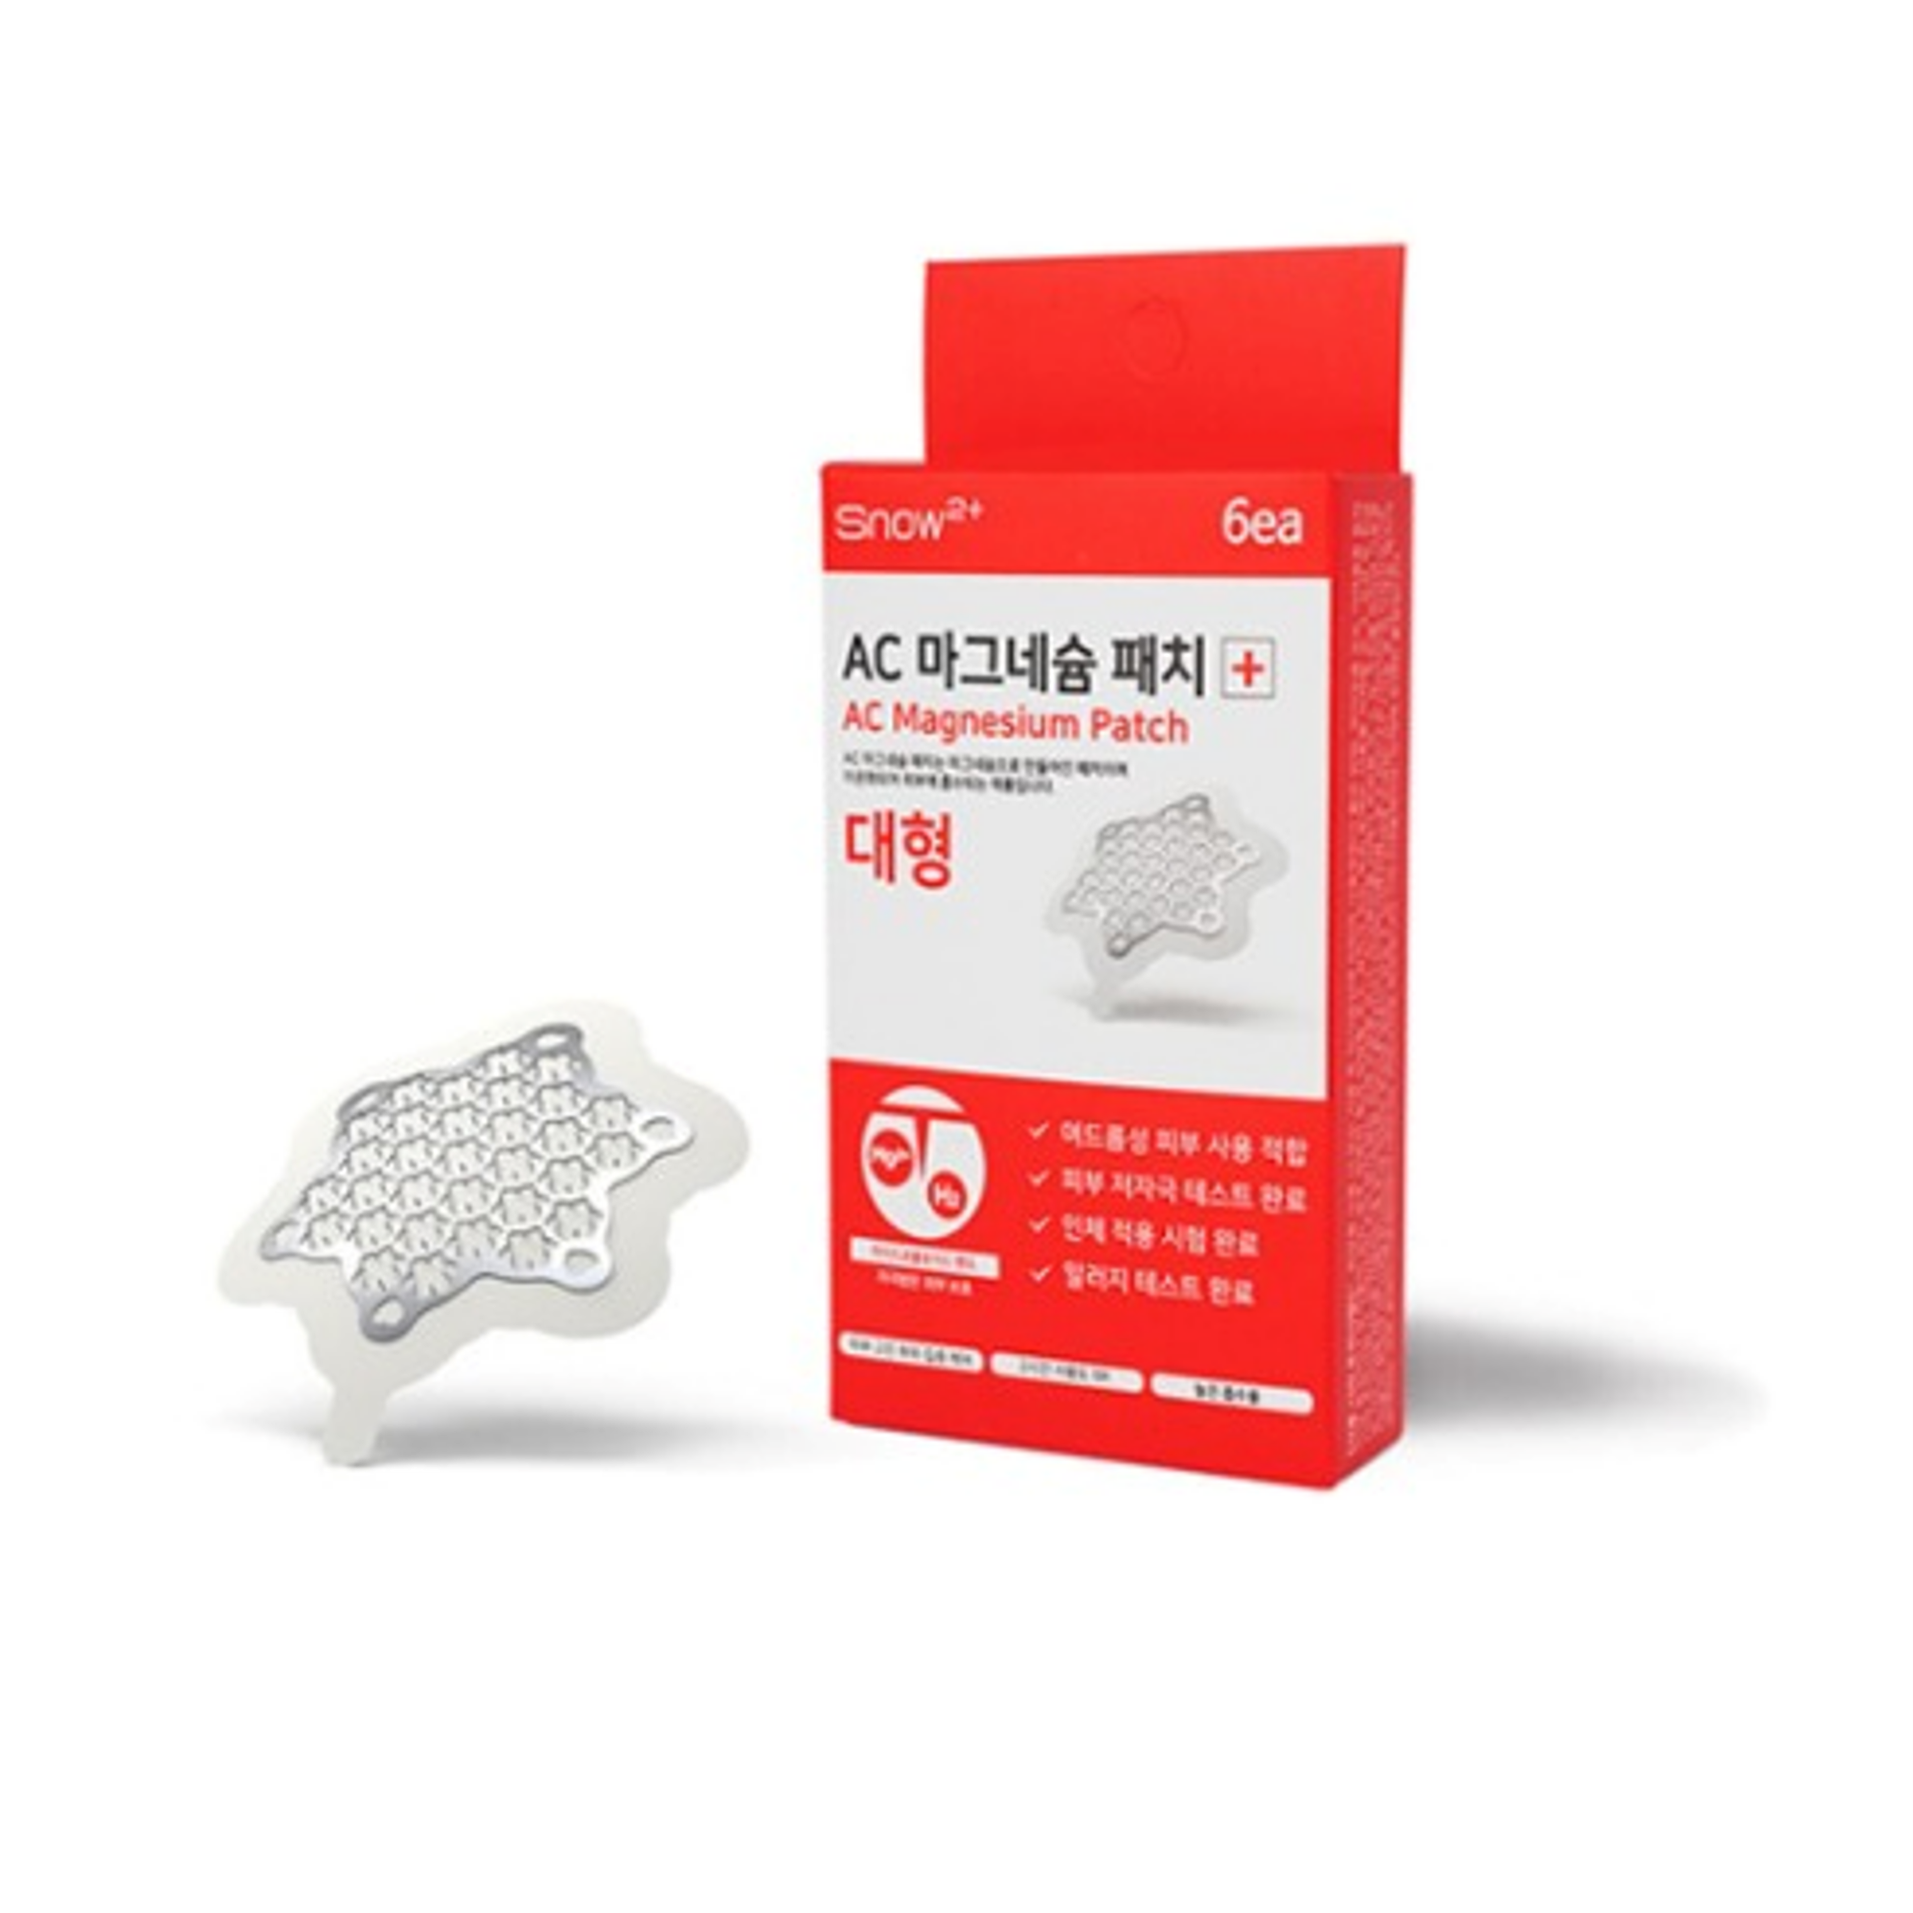 AC Magnesium Patch Mini, Small, Large size